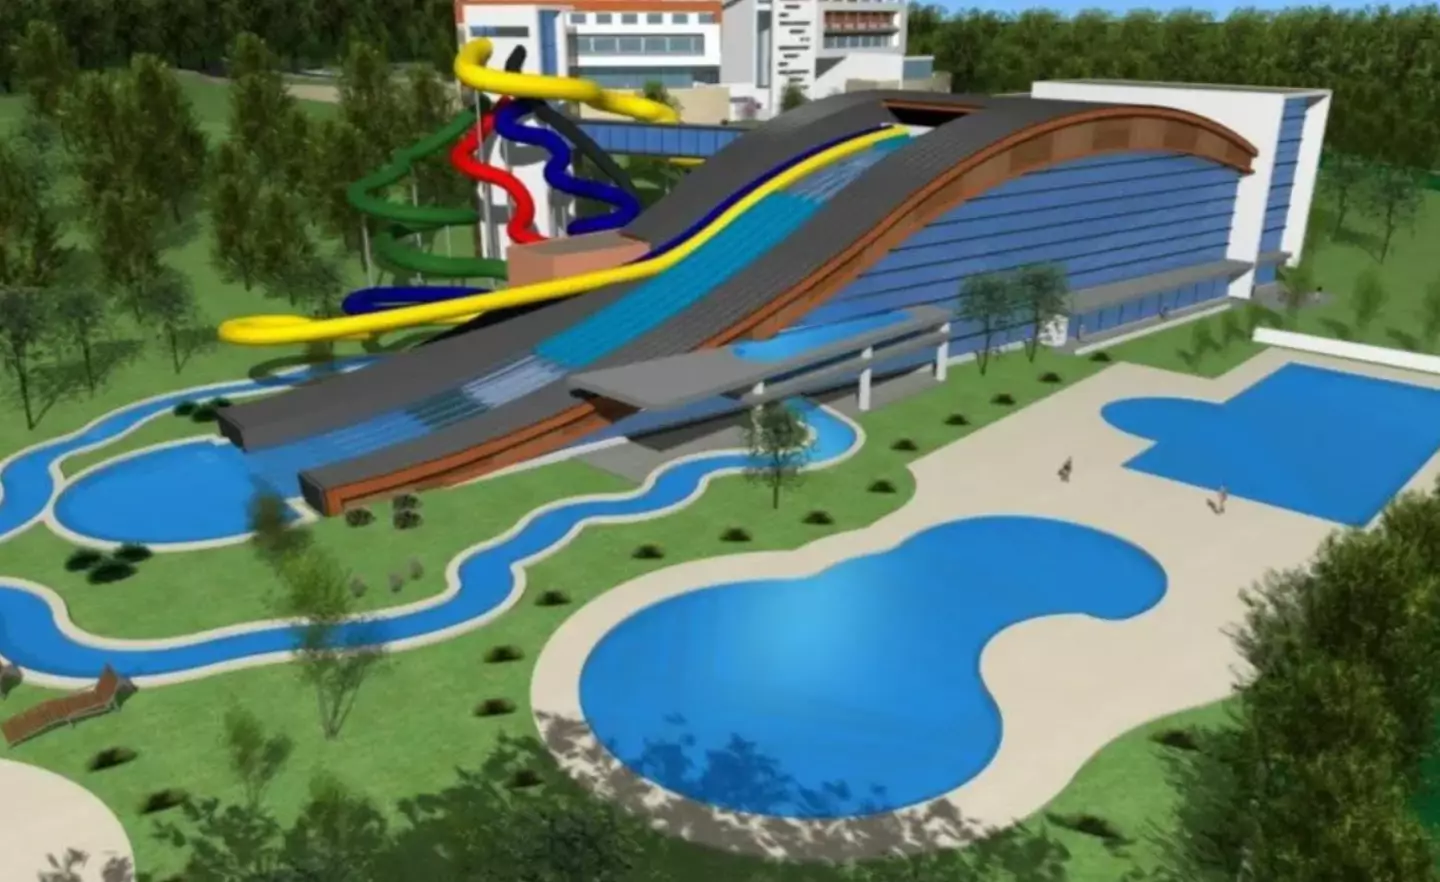 Plans for the waterpark include a number of features.